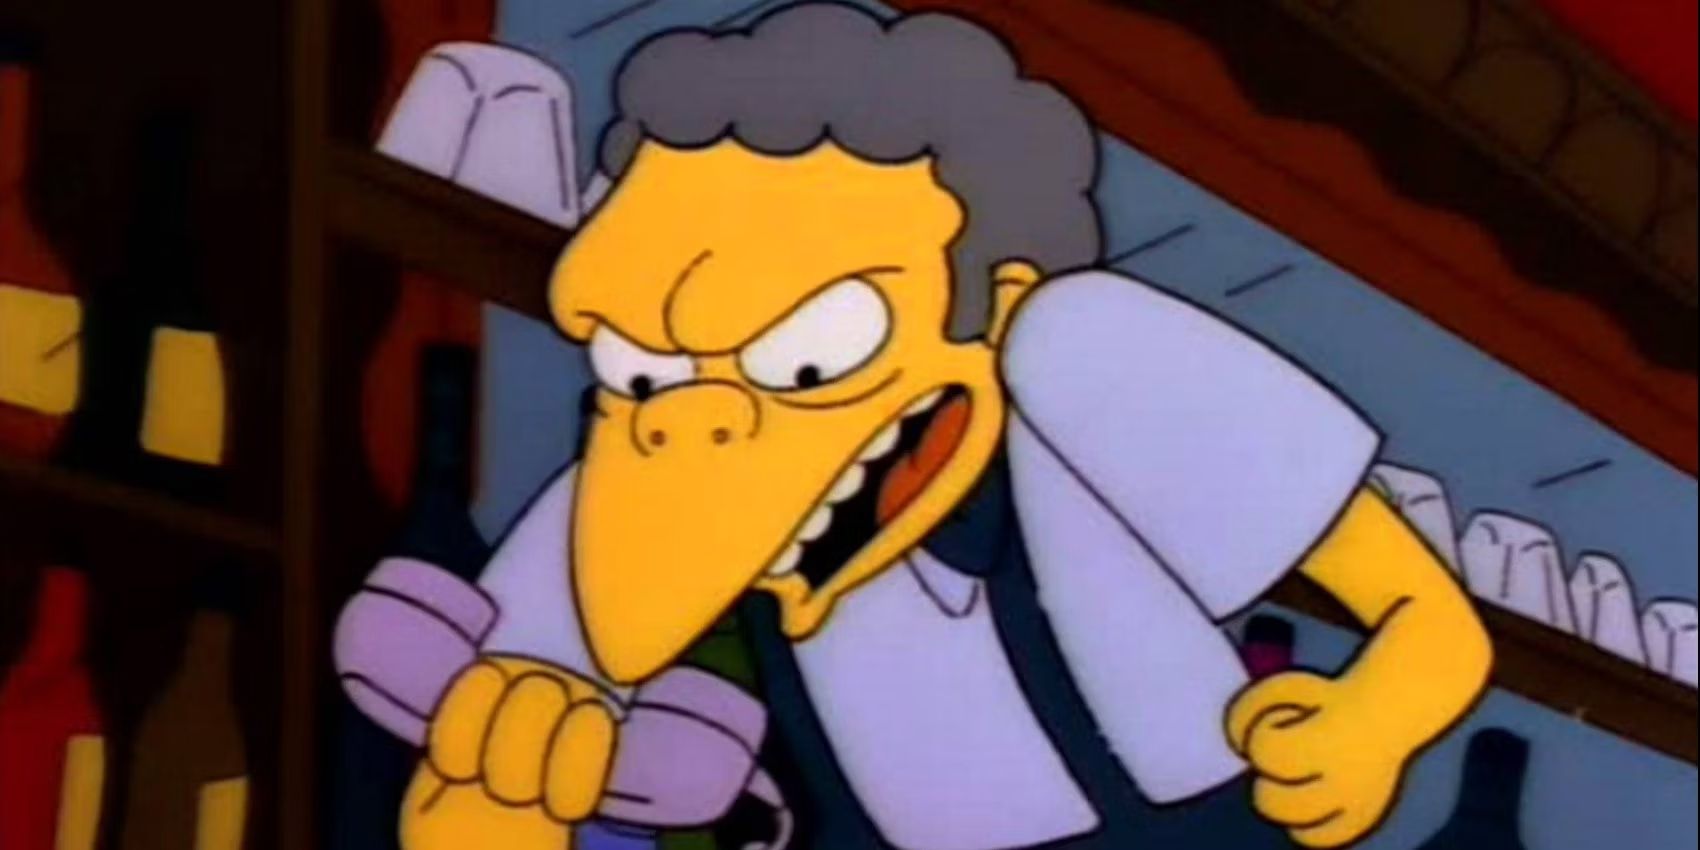 Moe angrily yelling at the phone in The Simpsons